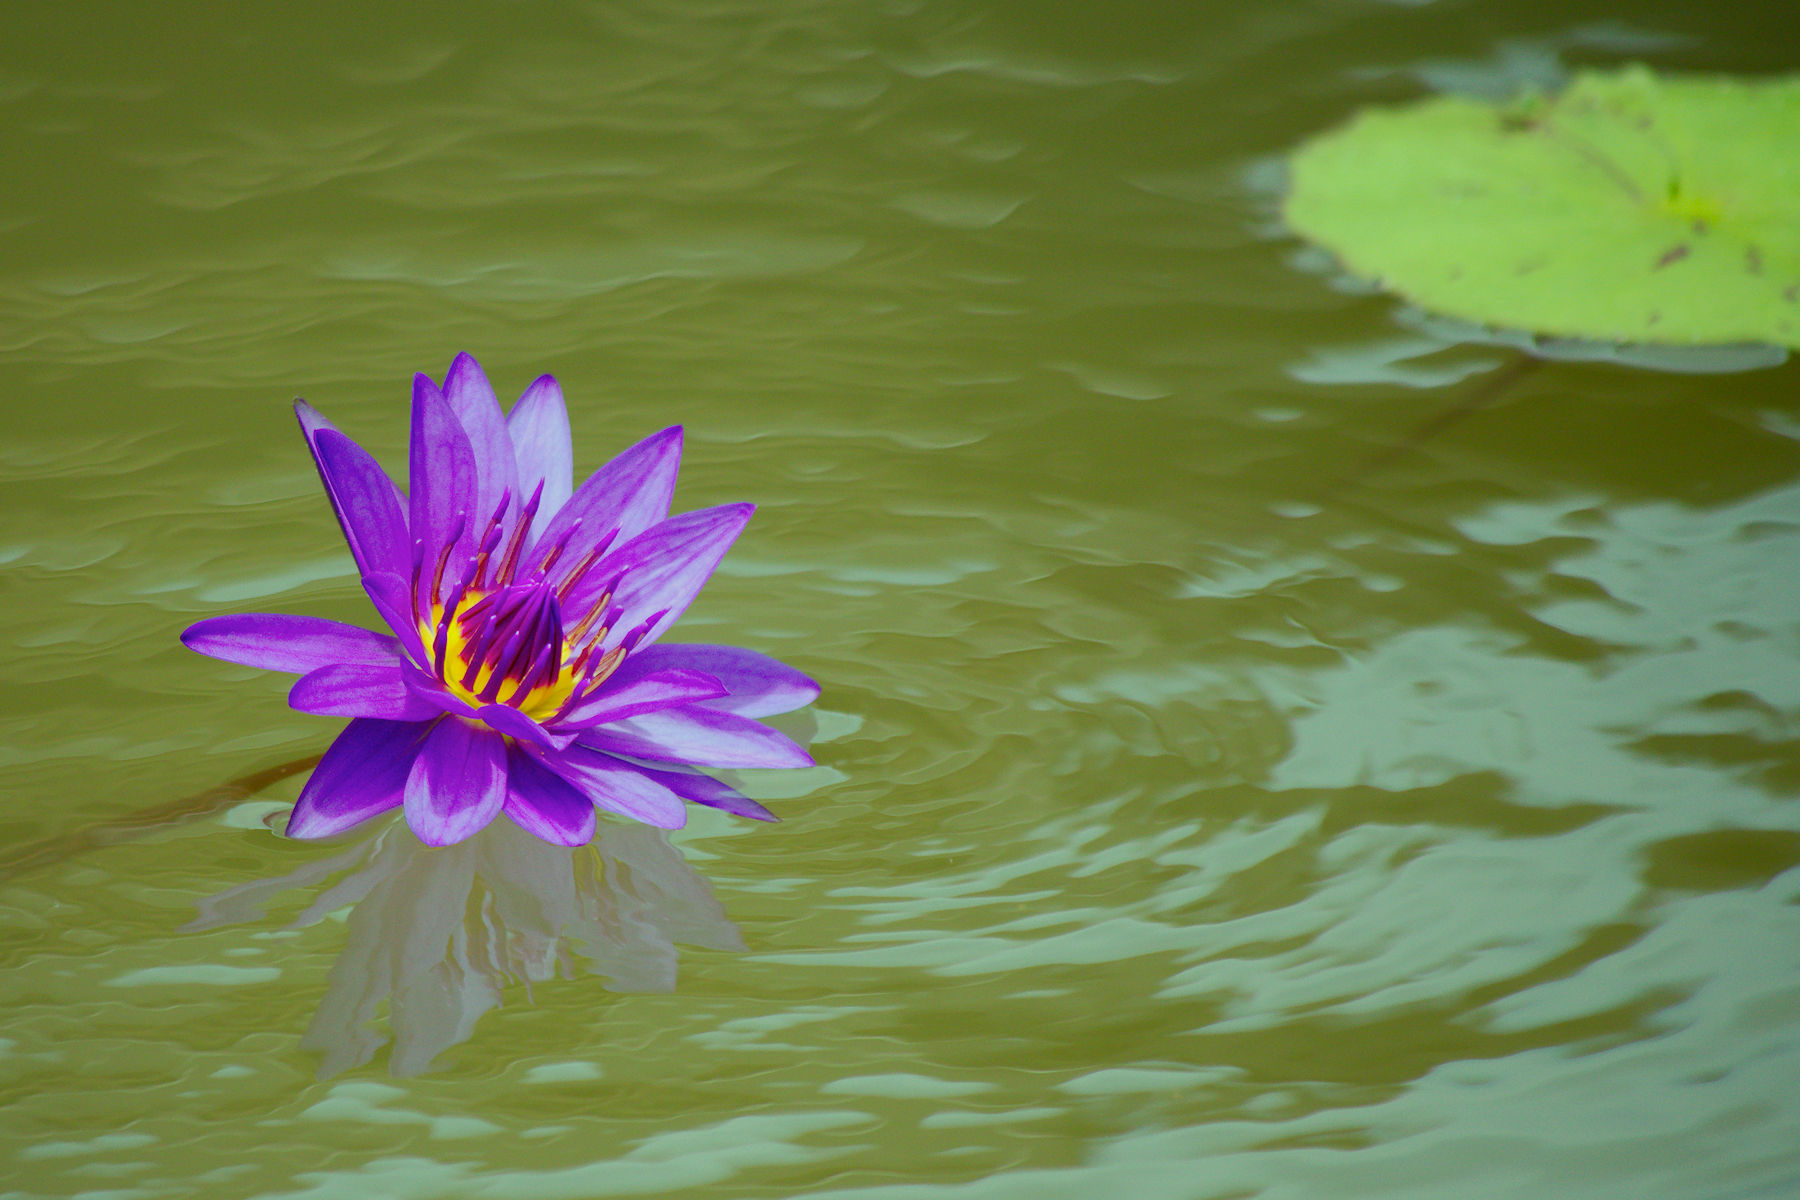 Life Cycle of a Lotus Blossom